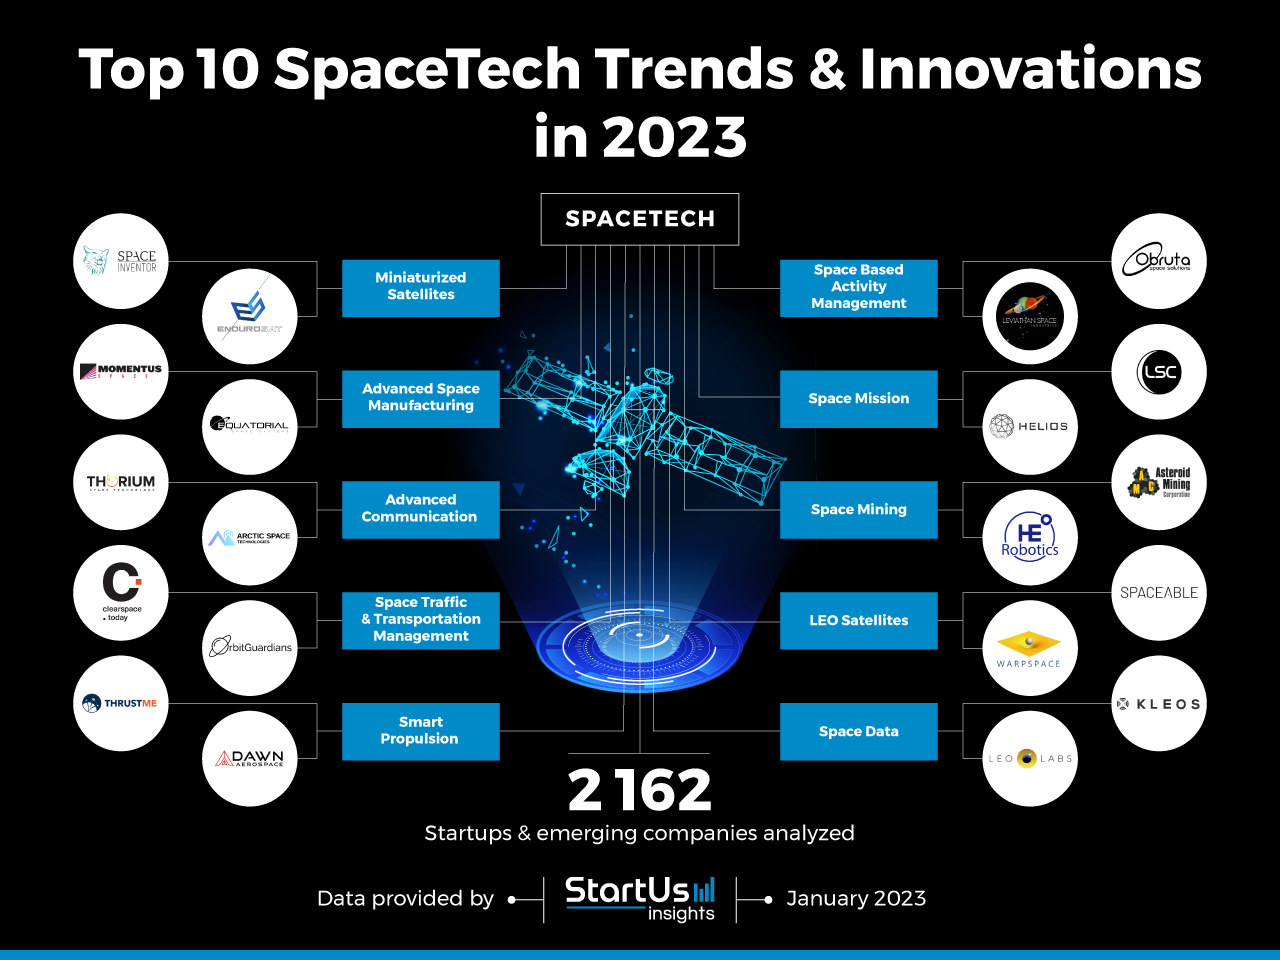 SpaceTech-Trends-InnovationMap-StartUs-Insights-noresize